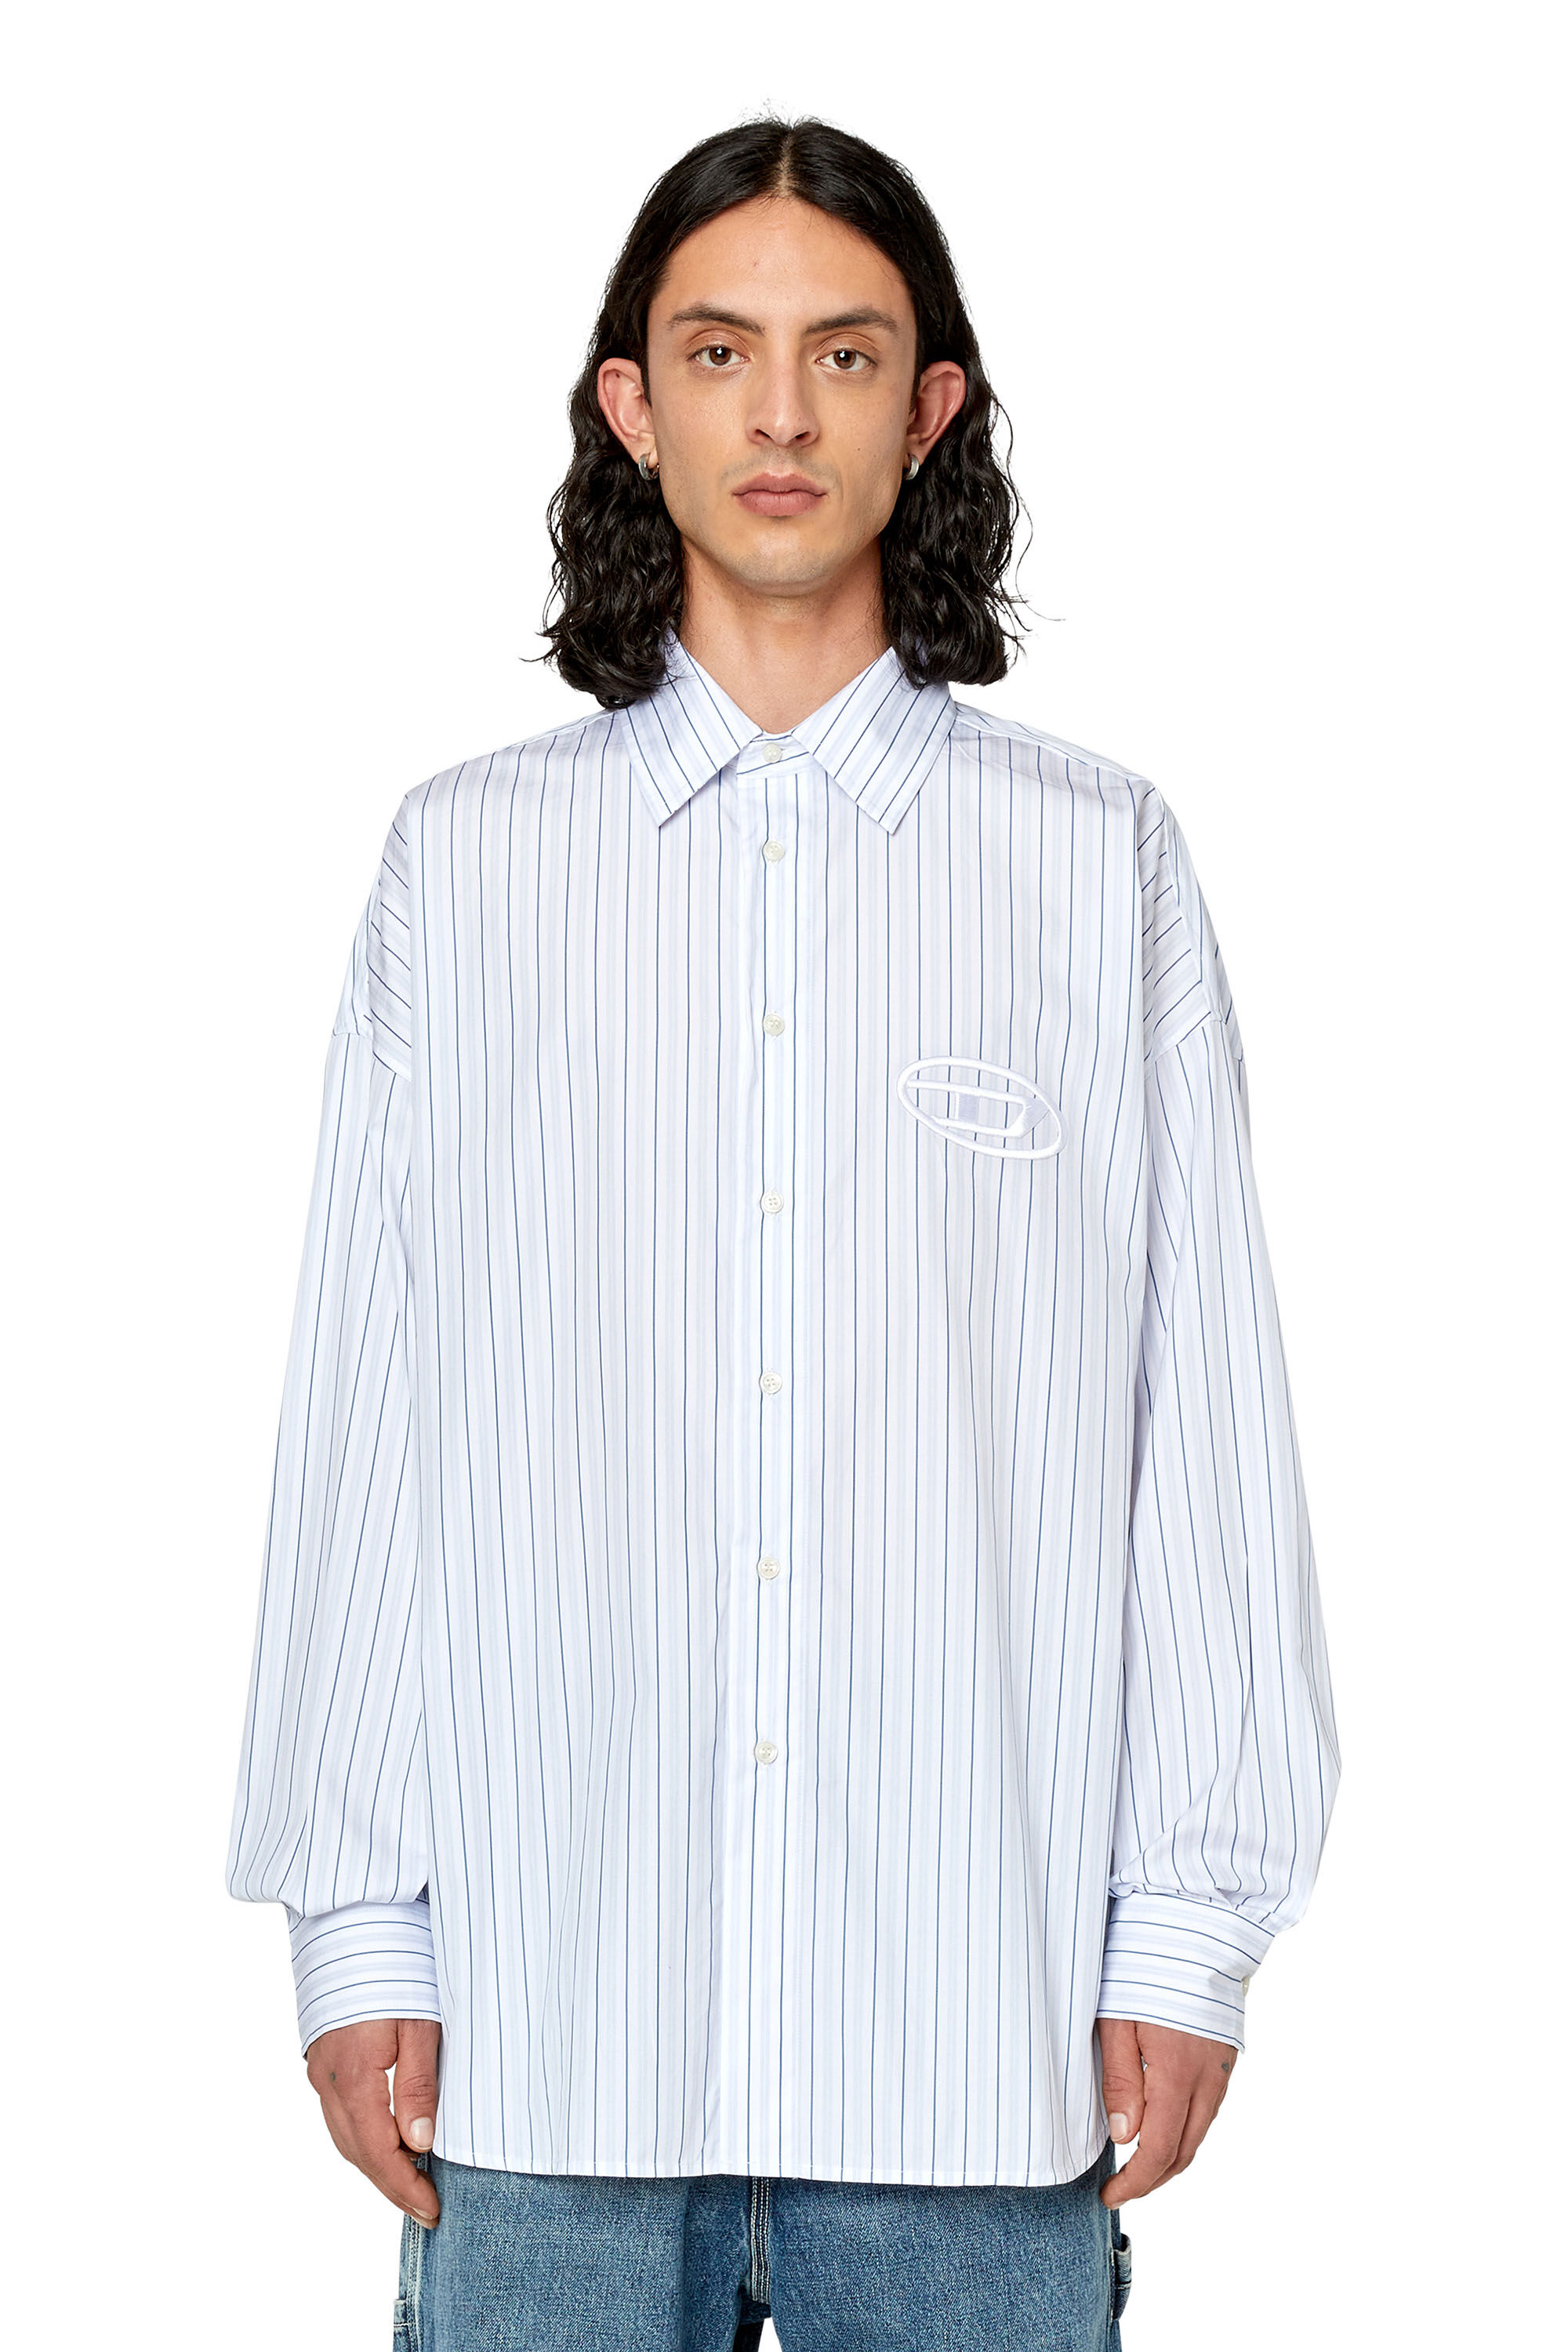 Diesel - S-DOUBLY-STRIPE, Blue/White - Image 3